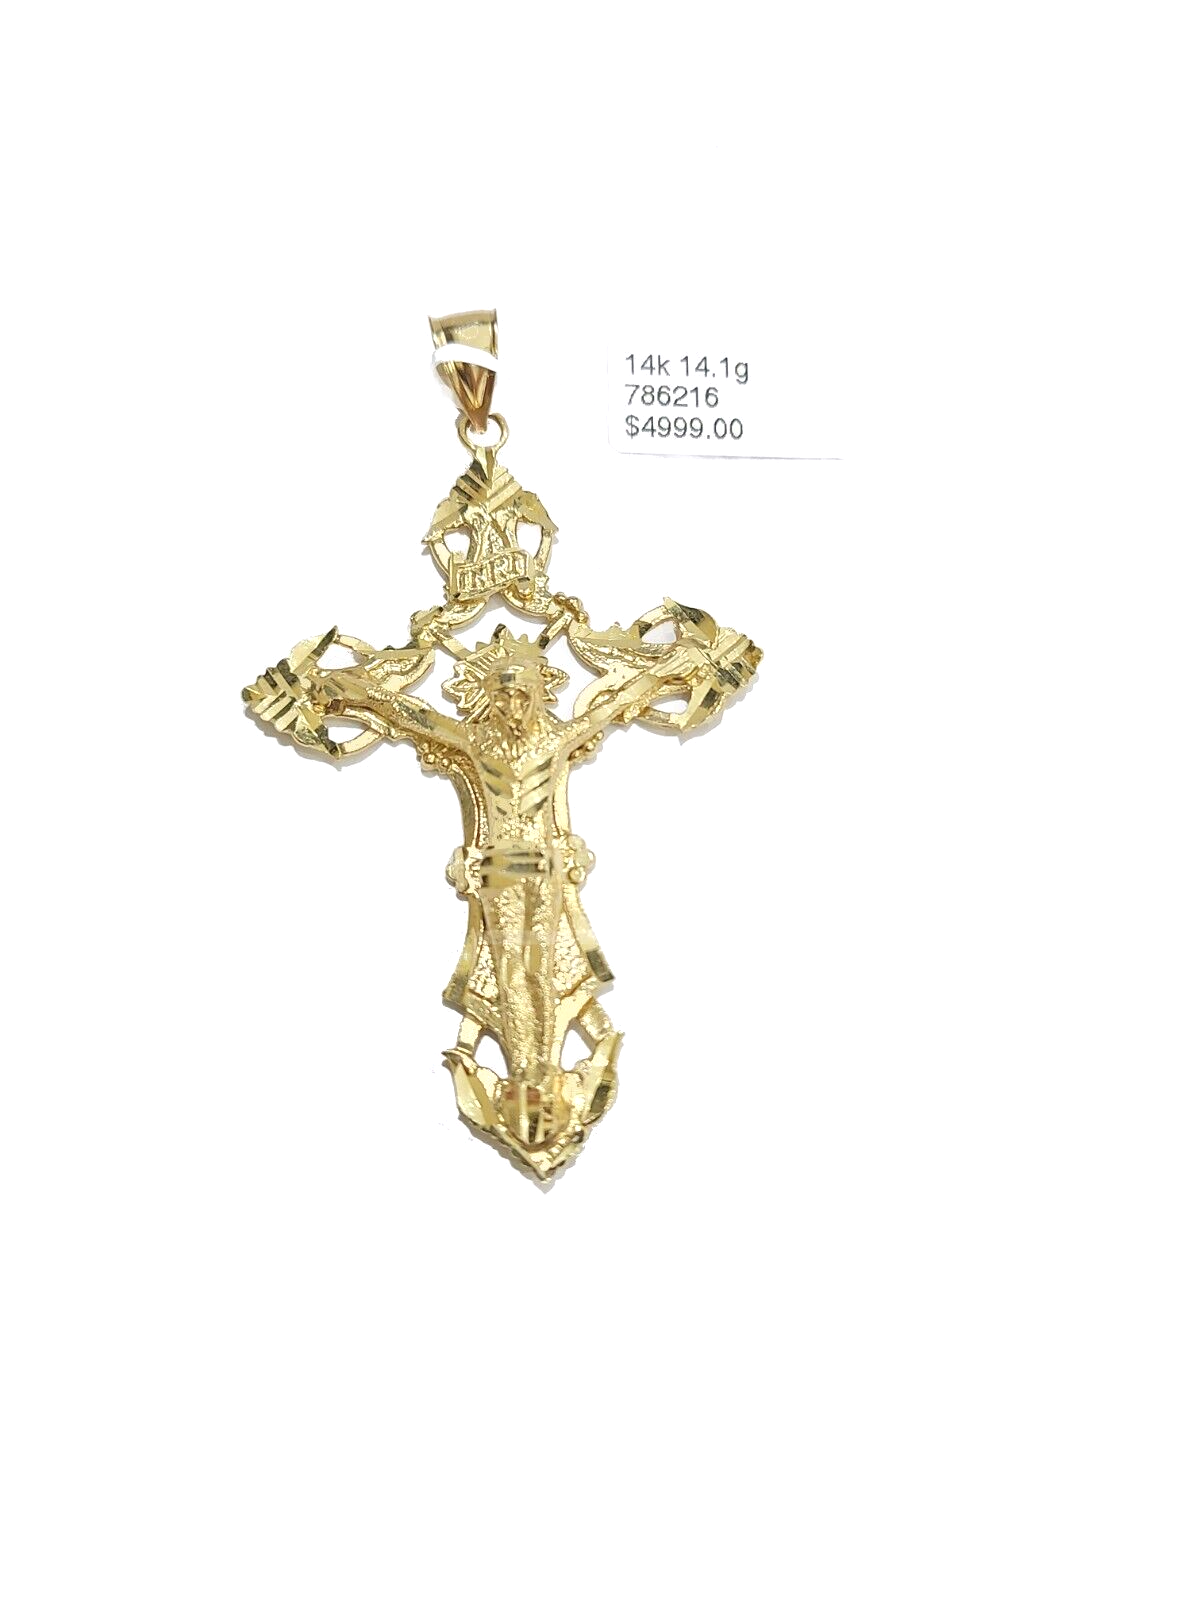 Real 14k Yellow Gold Rope Chain 24'' Necklace Jesus Crucifix Cross Charm Pendant